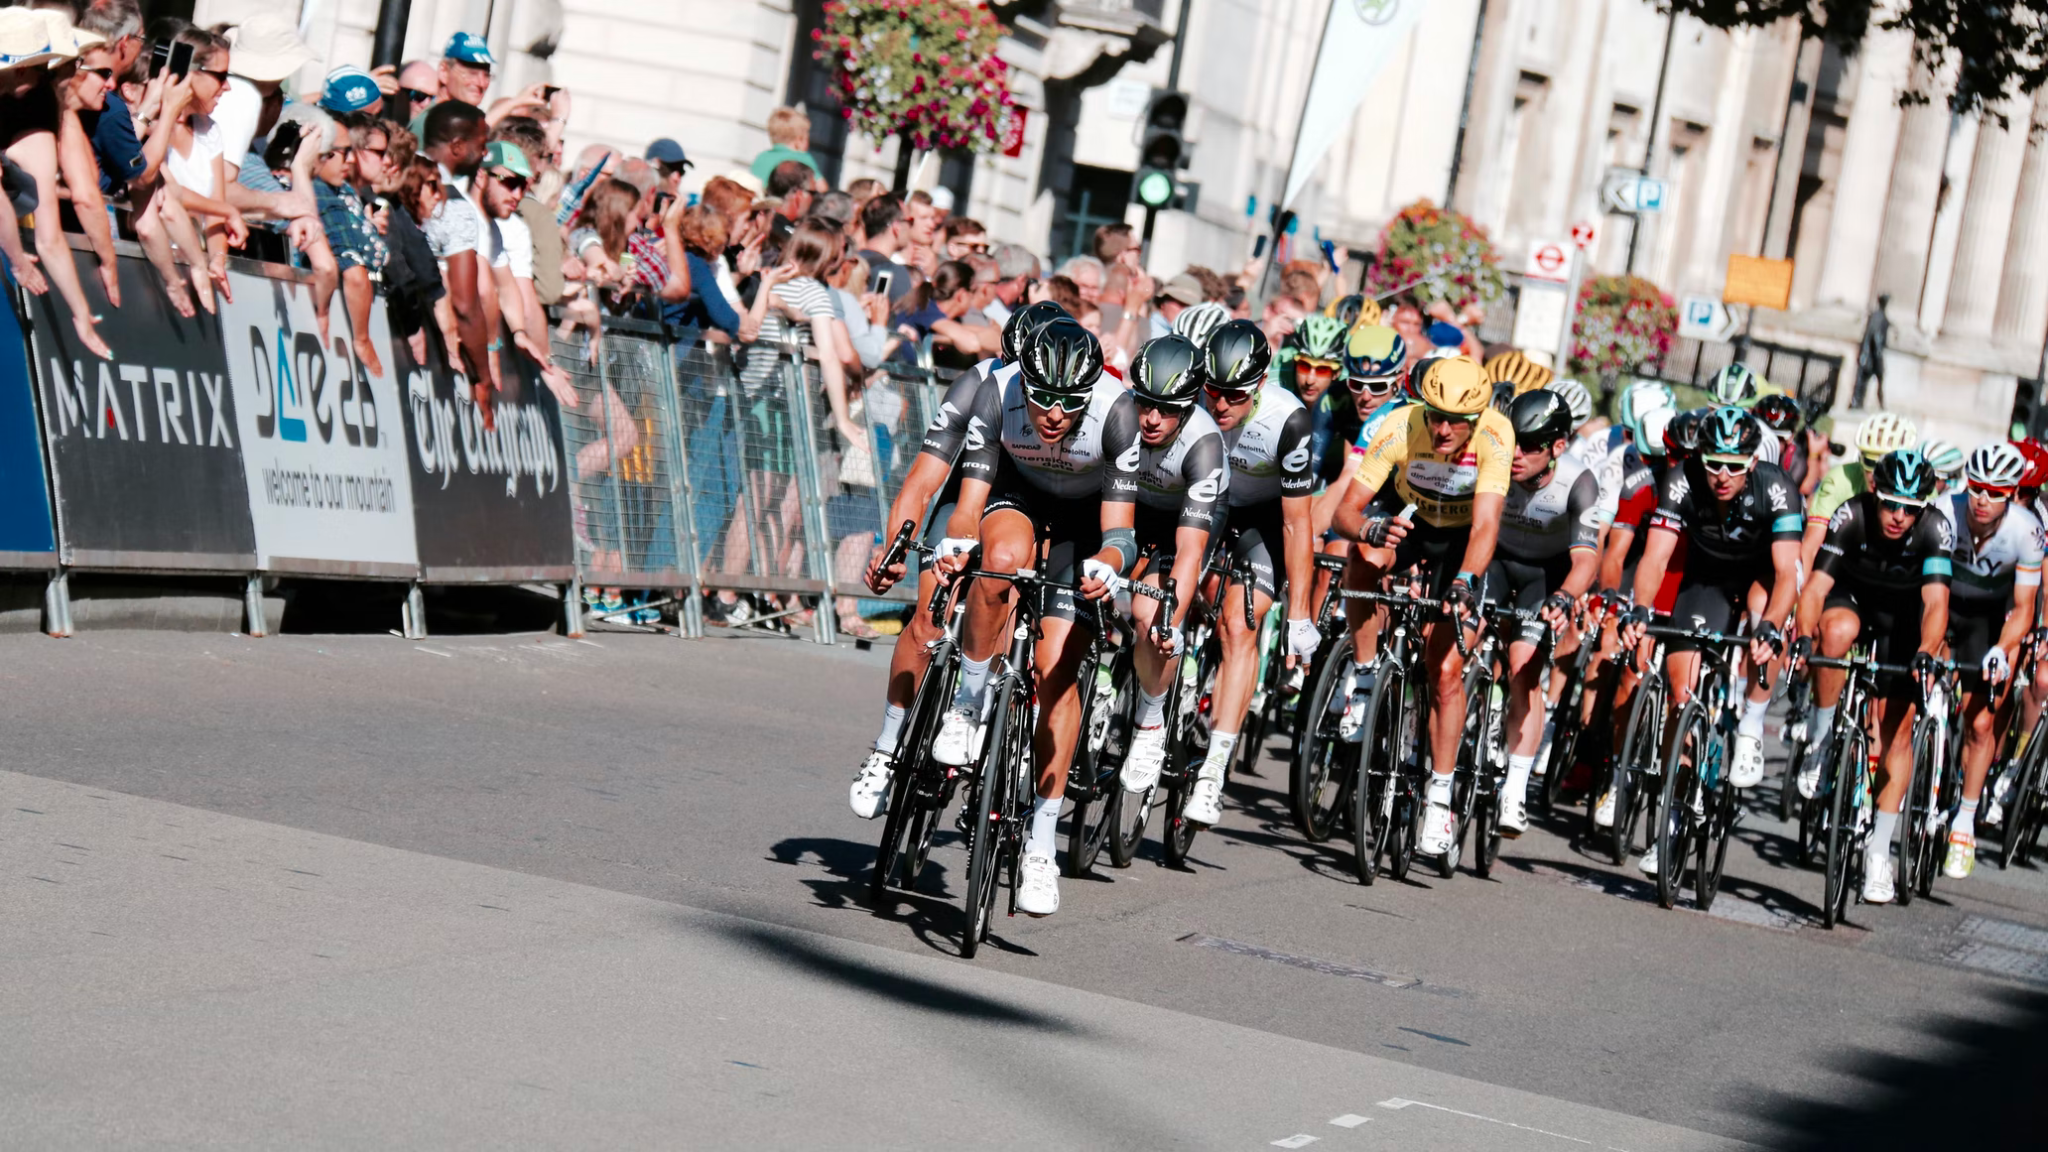 Cyclists competing in the Tour De France